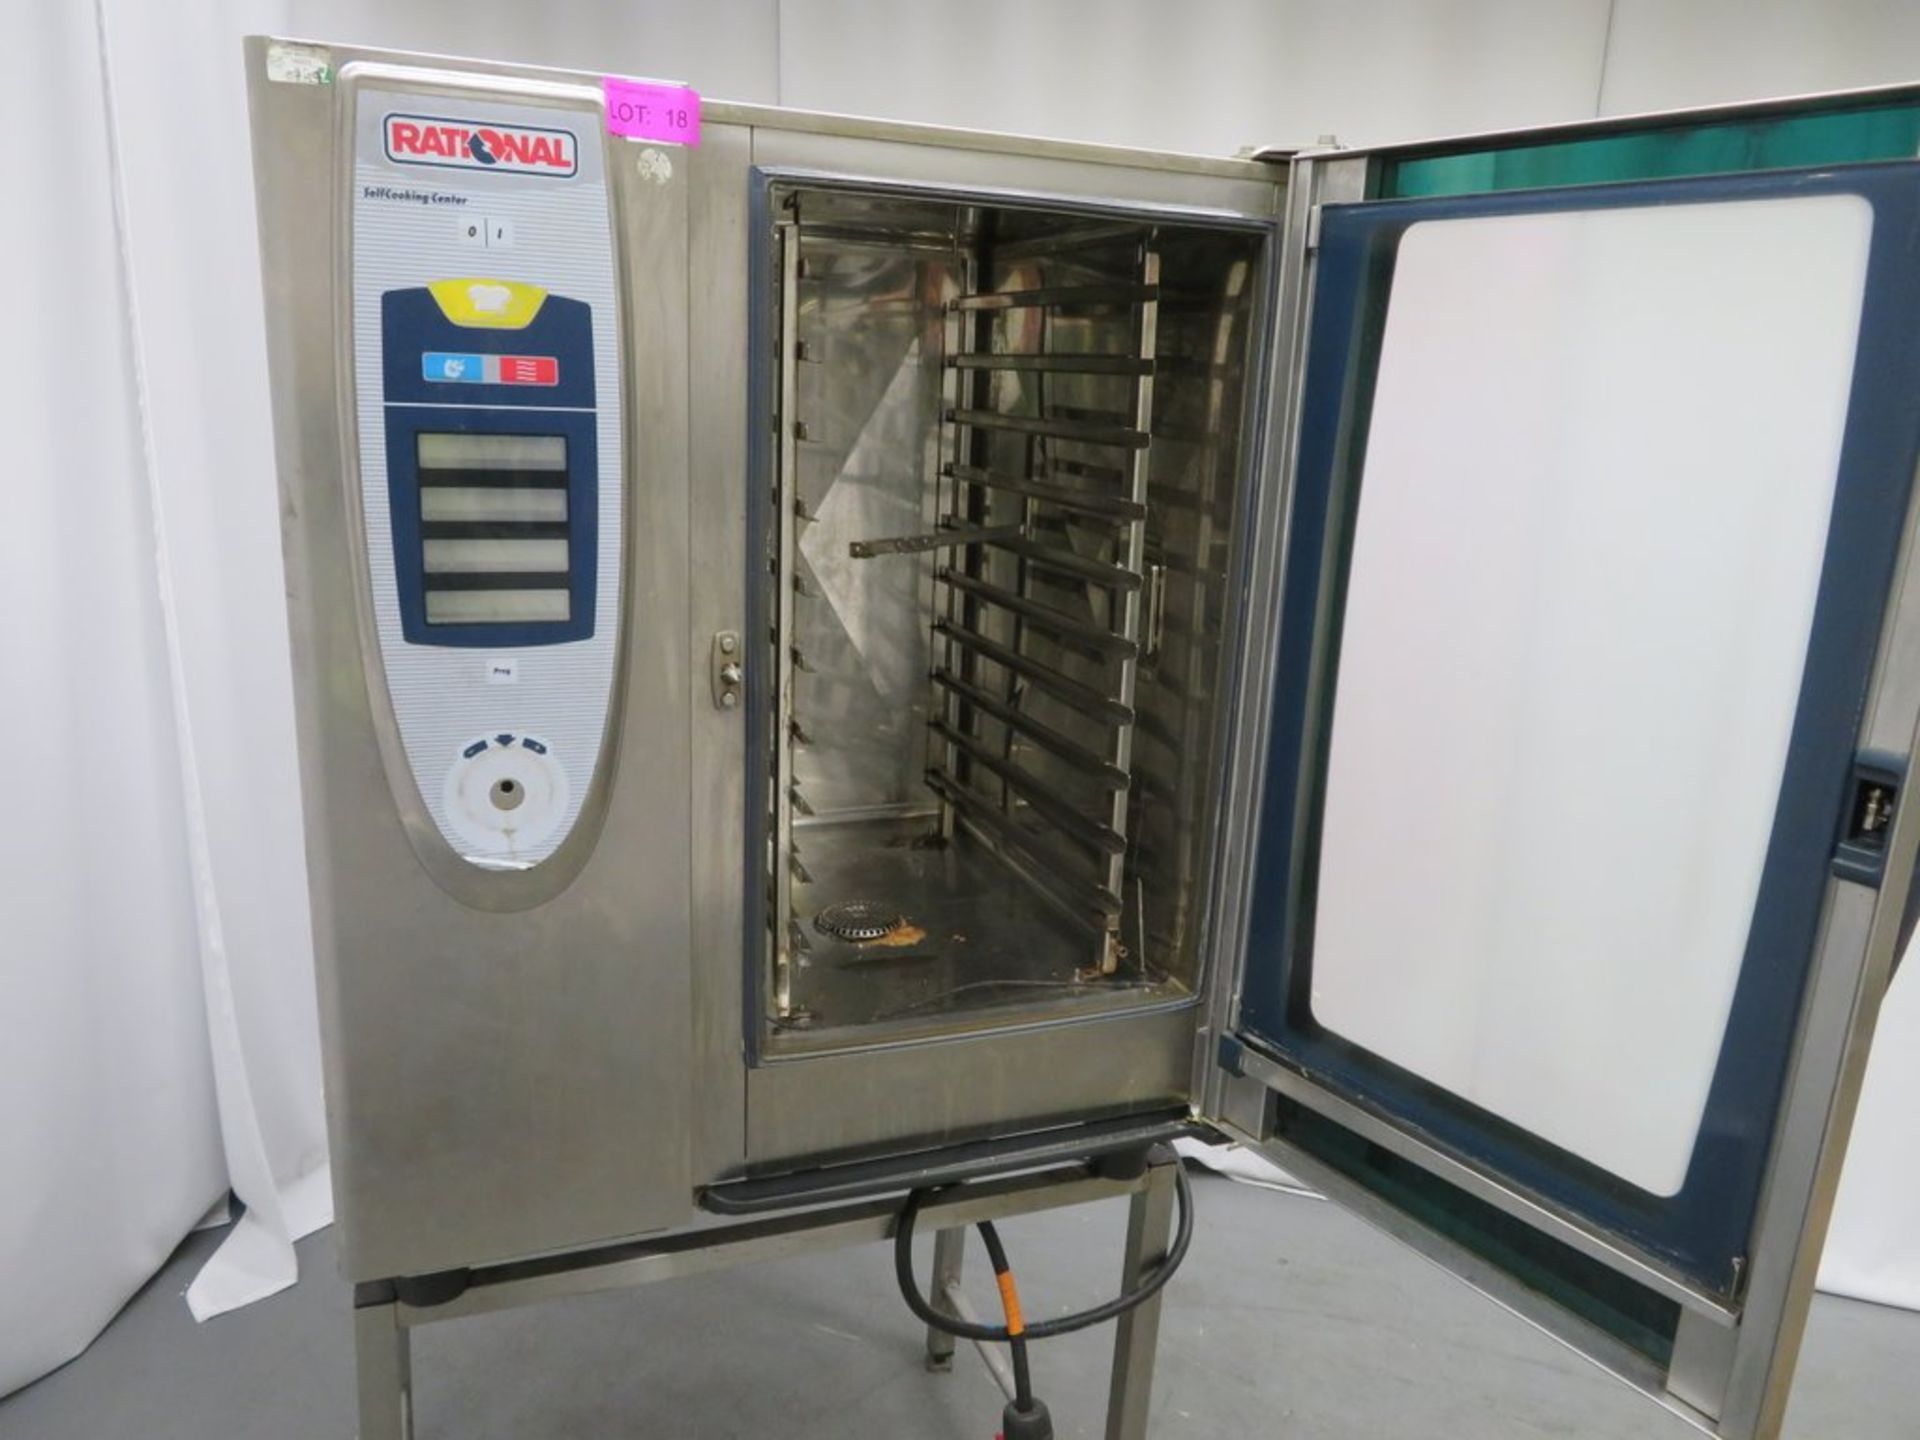 Rational SCC 101 10 grid combi oven, 3 phase electric (needs new dial) - Image 6 of 9